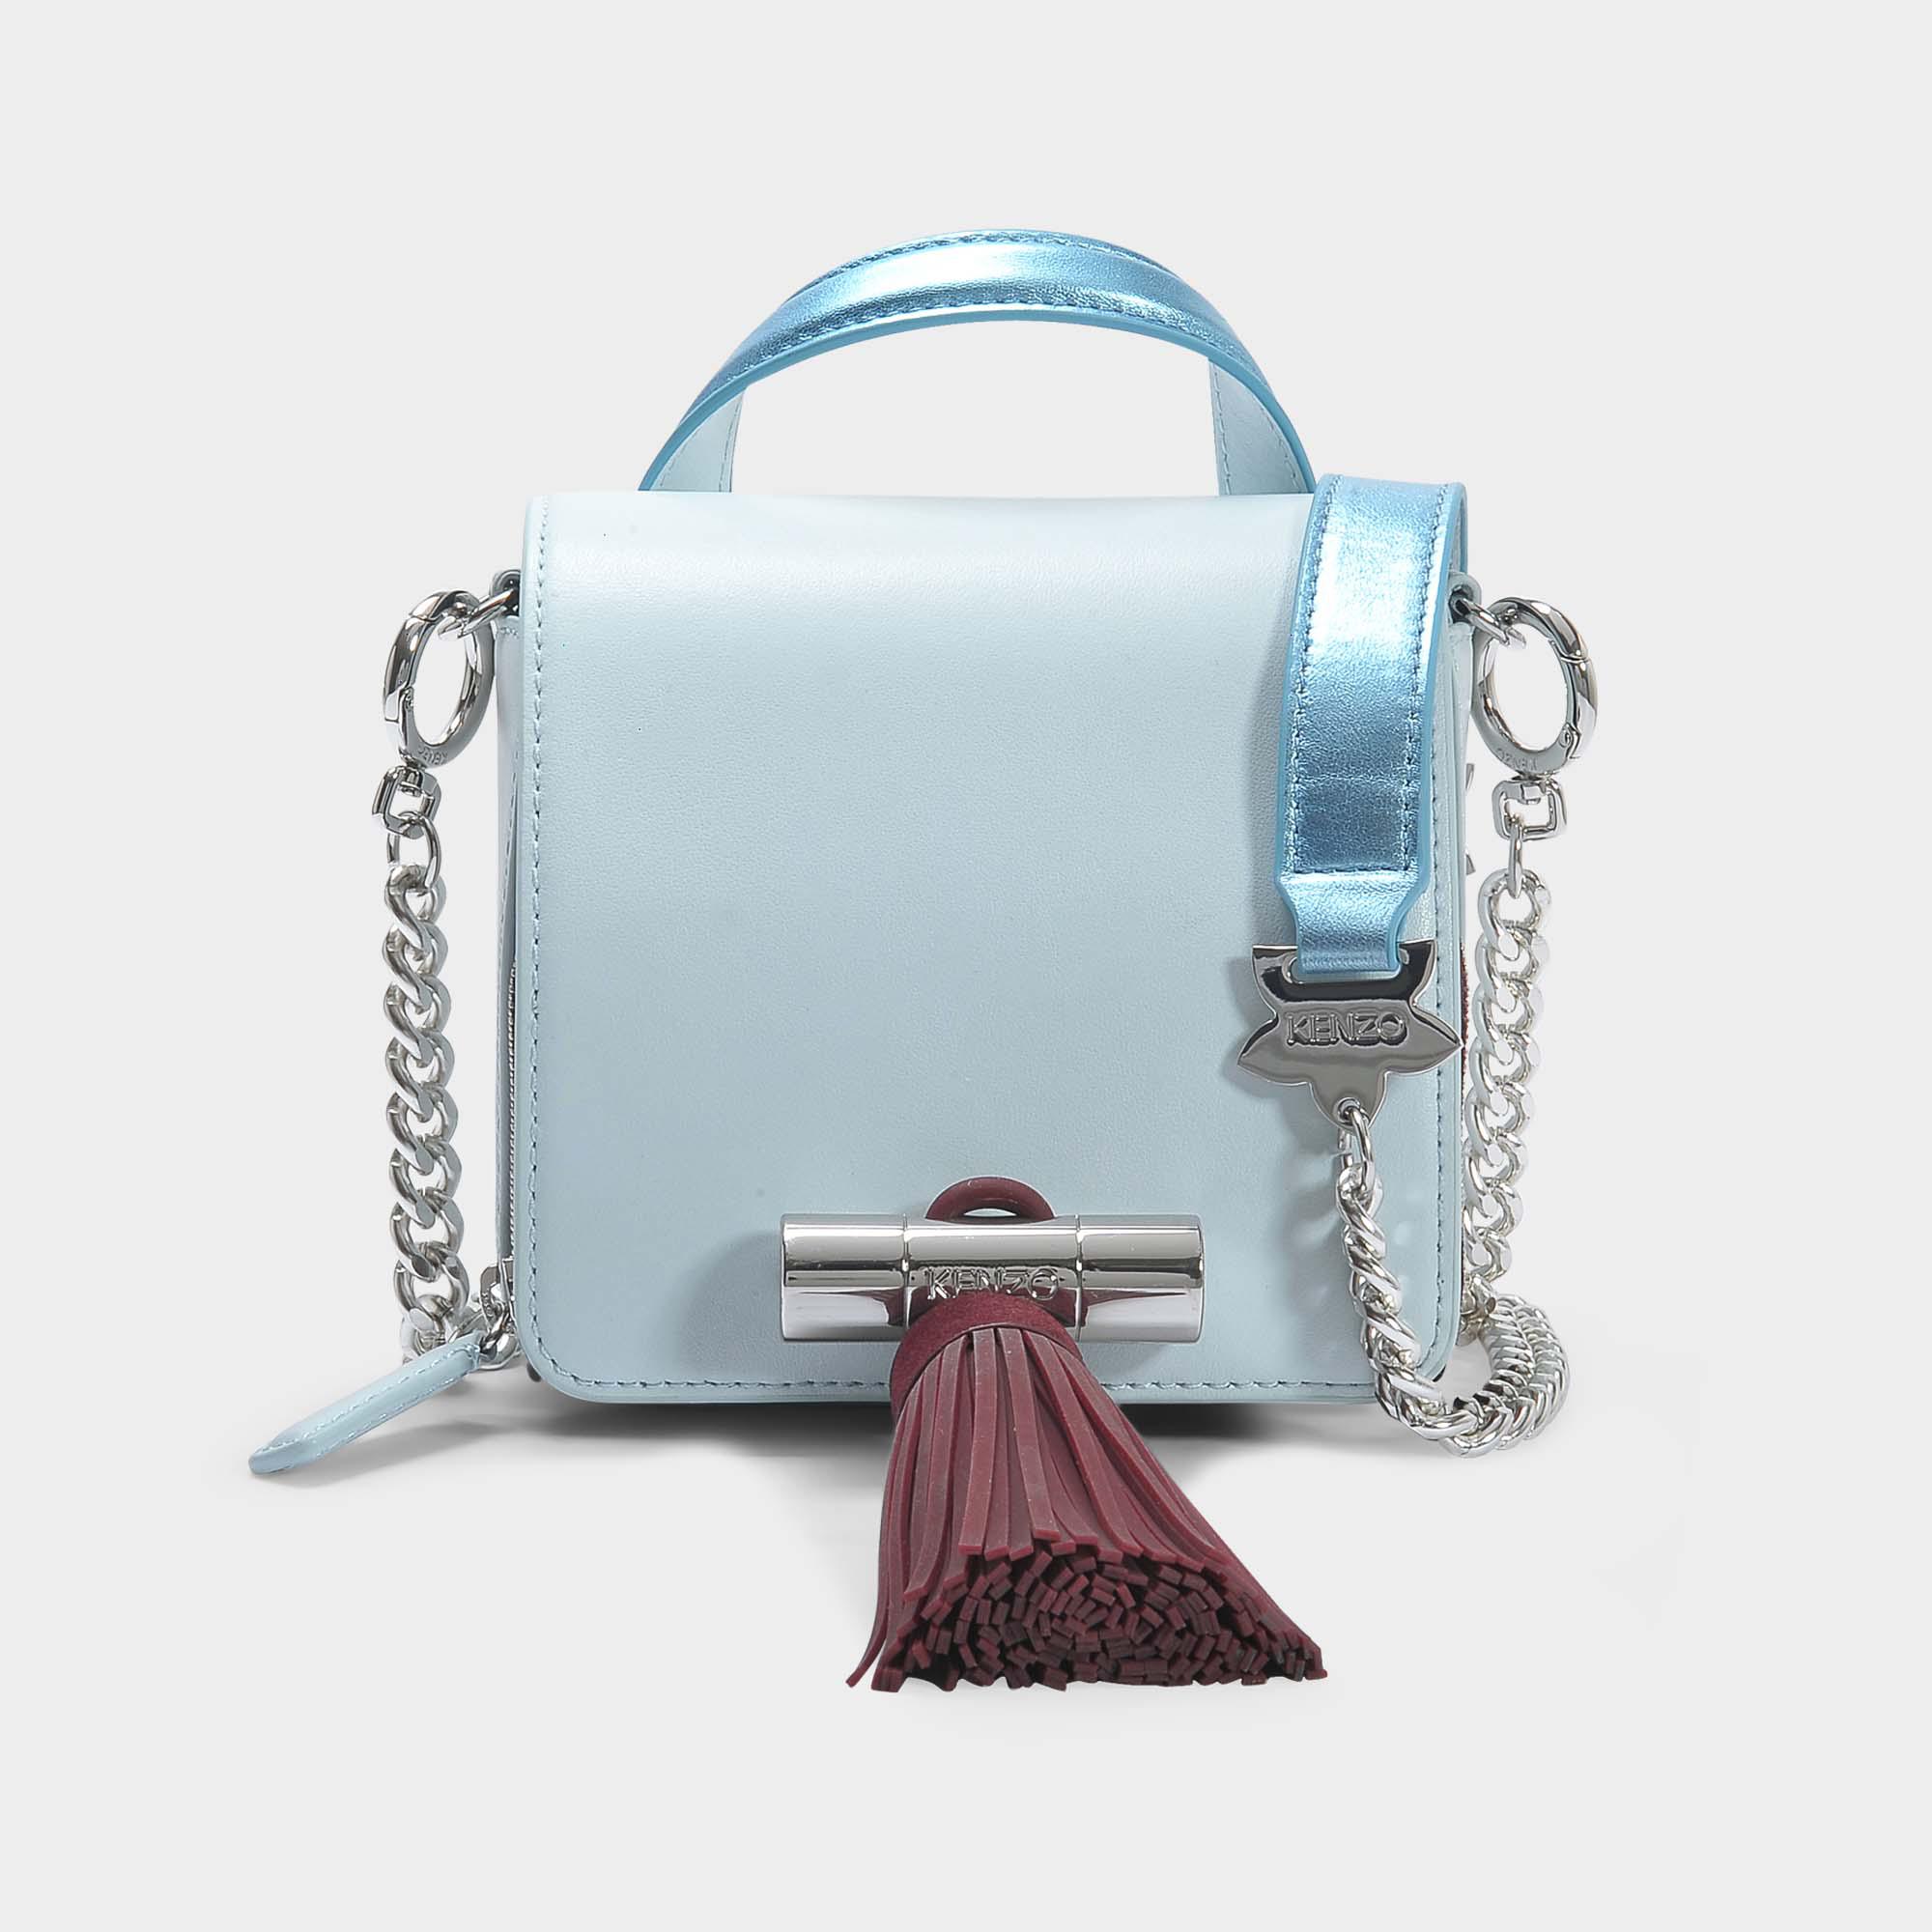 KENZO Sailor Chain Mini Top Handle Bag In Sky Blue Suede - Lyst